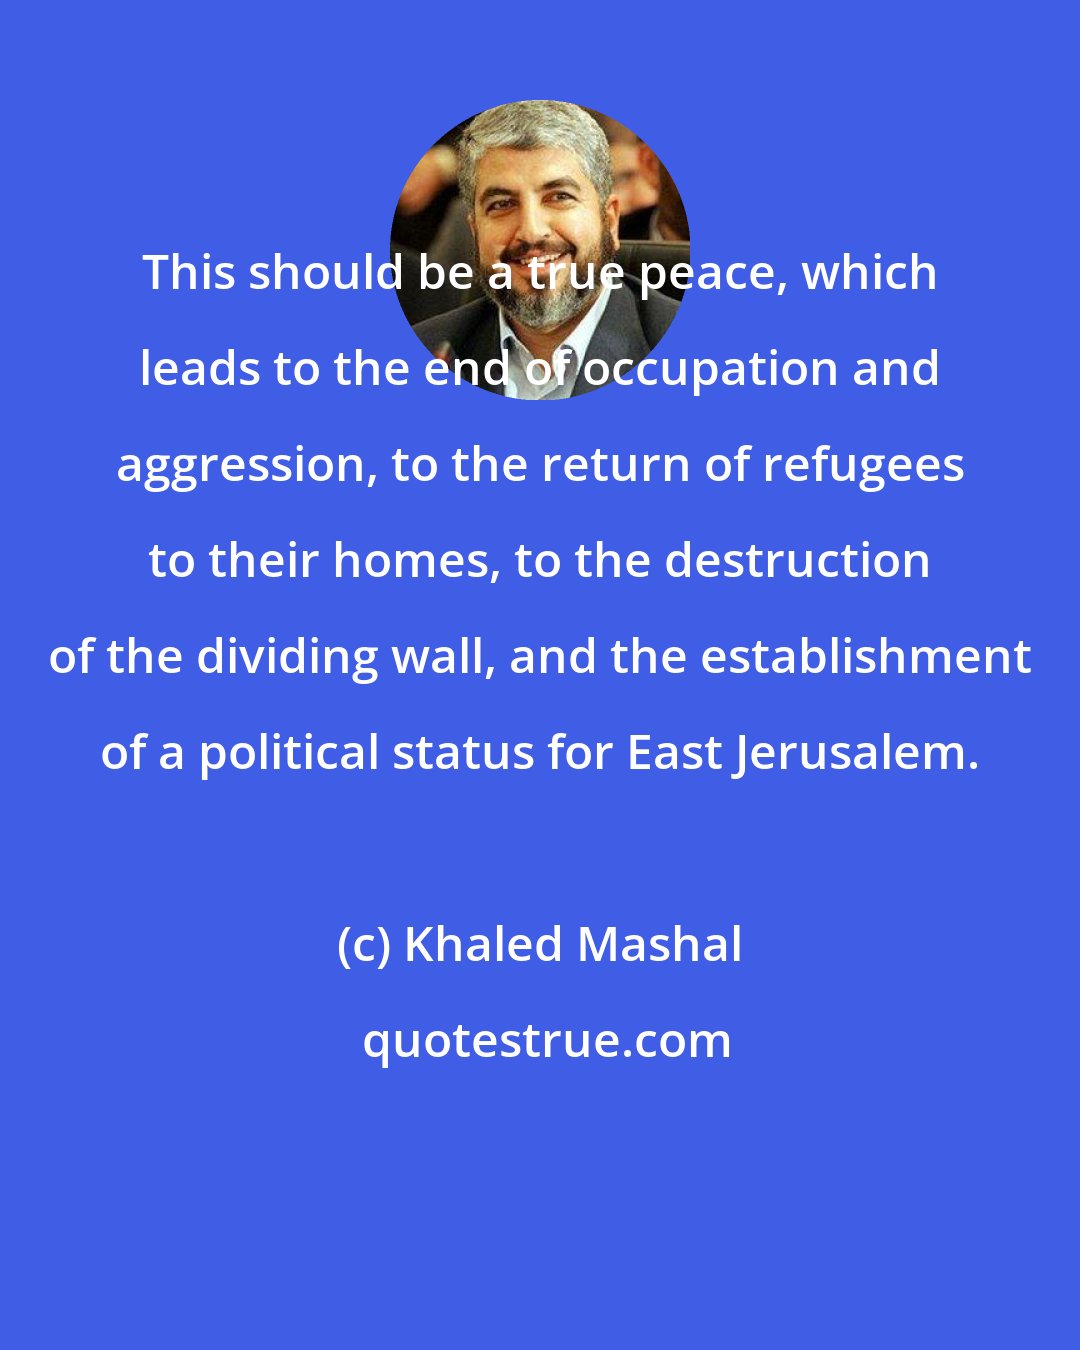 Khaled Mashal: This should be a true peace, which leads to the end of occupation and aggression, to the return of refugees to their homes, to the destruction of the dividing wall, and the establishment of a political status for East Jerusalem.